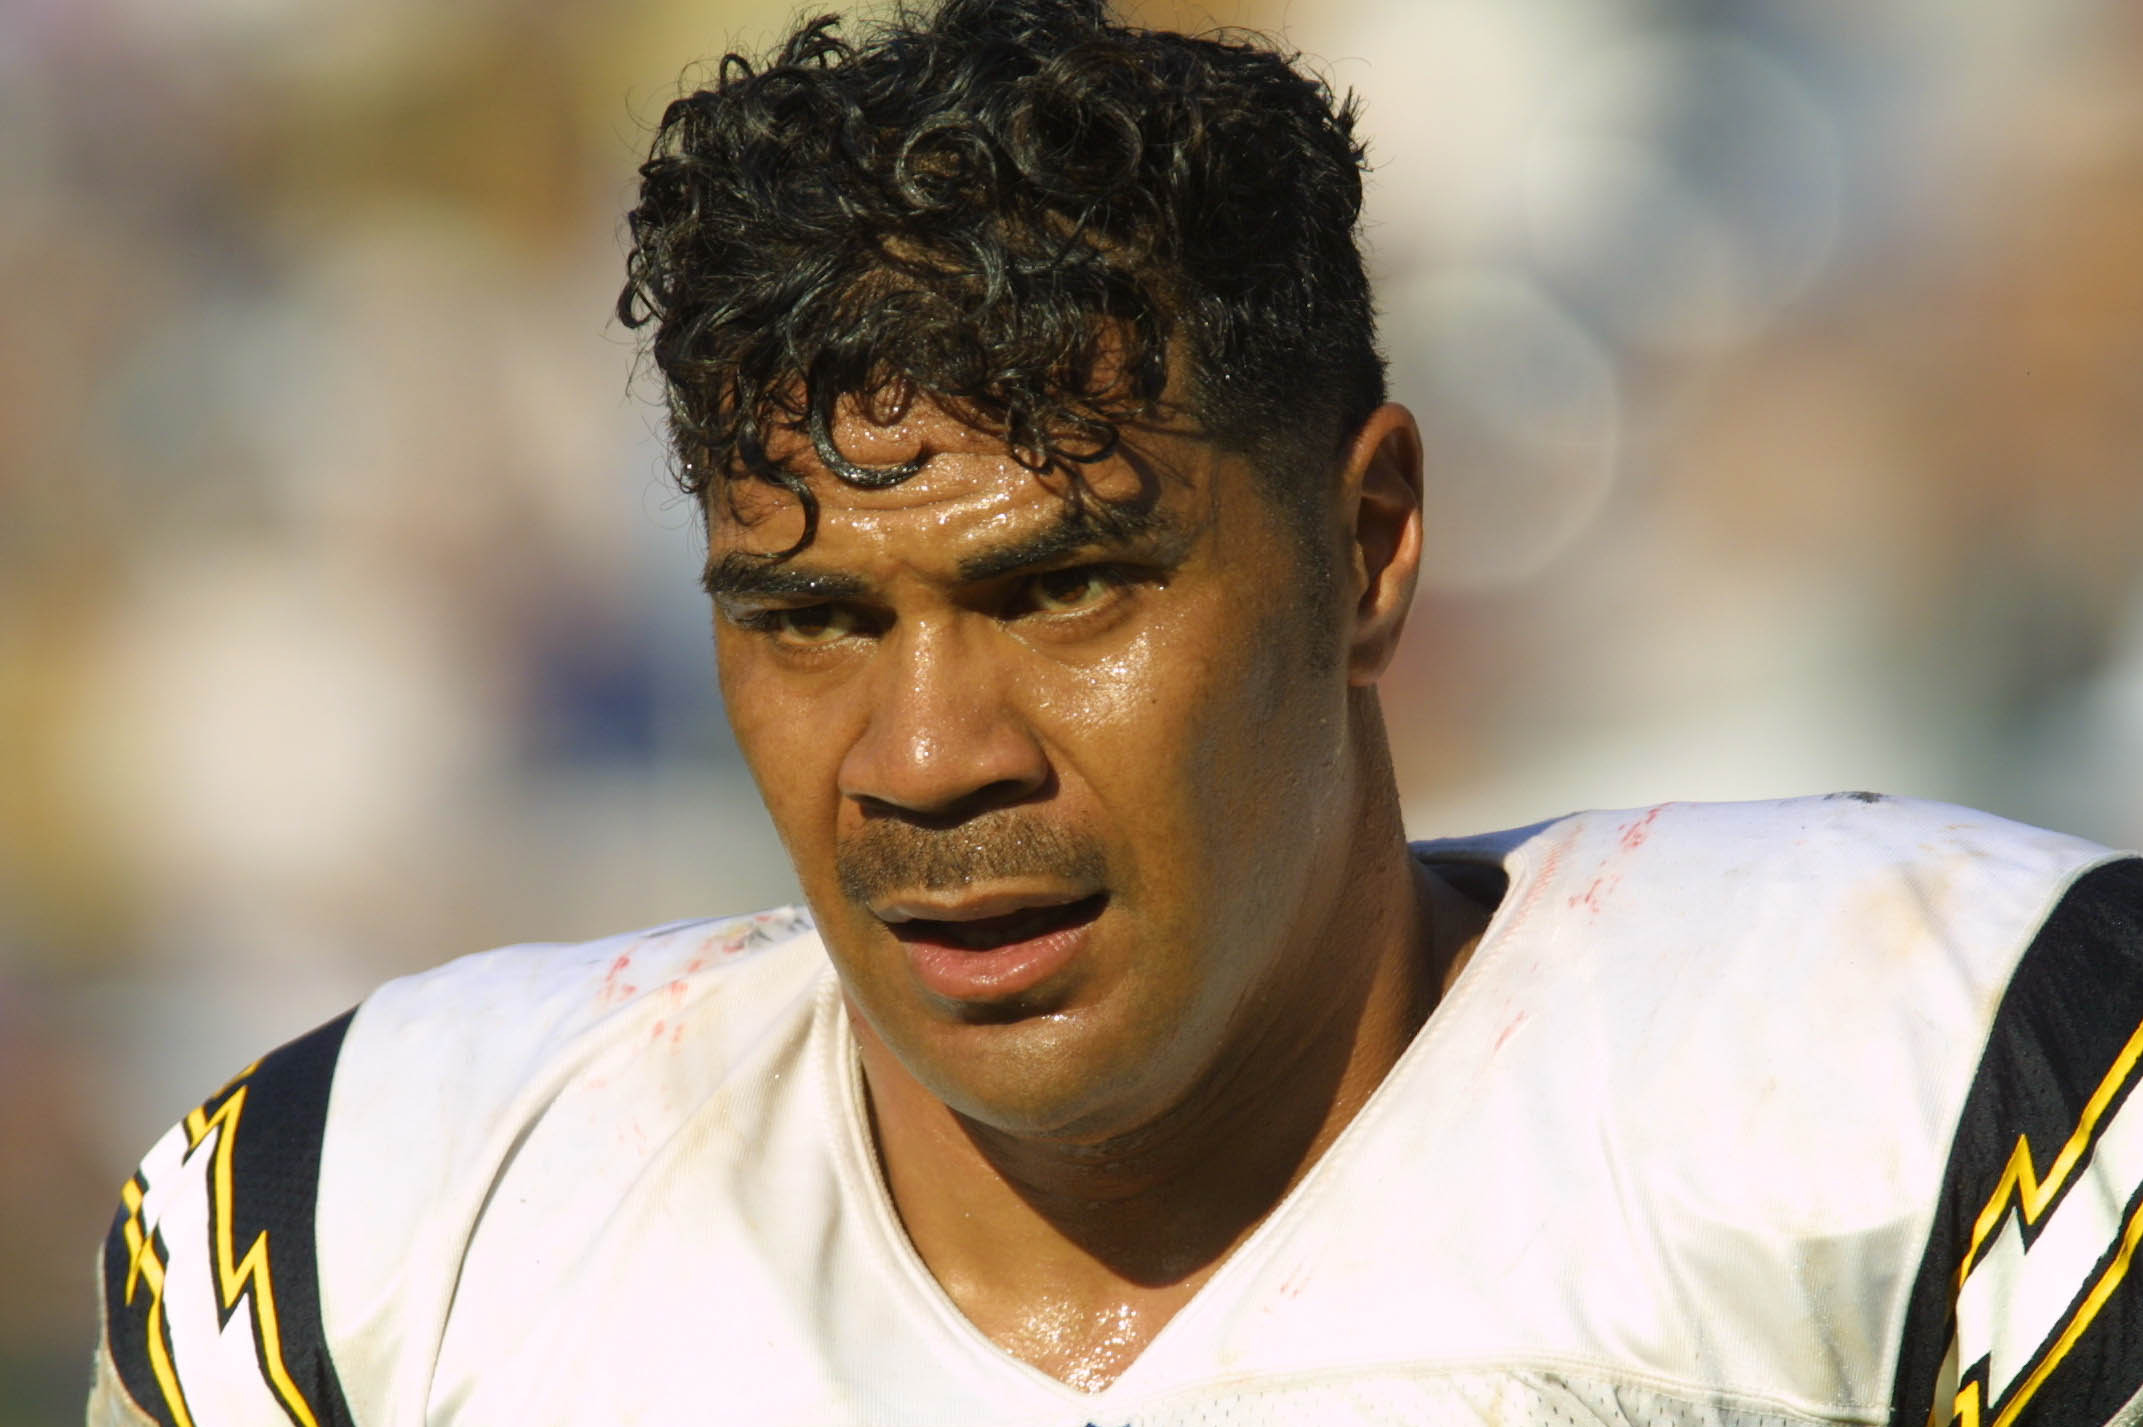 Junior Seau: Twitter Reacts to Tragic Passing of Former Linebacker